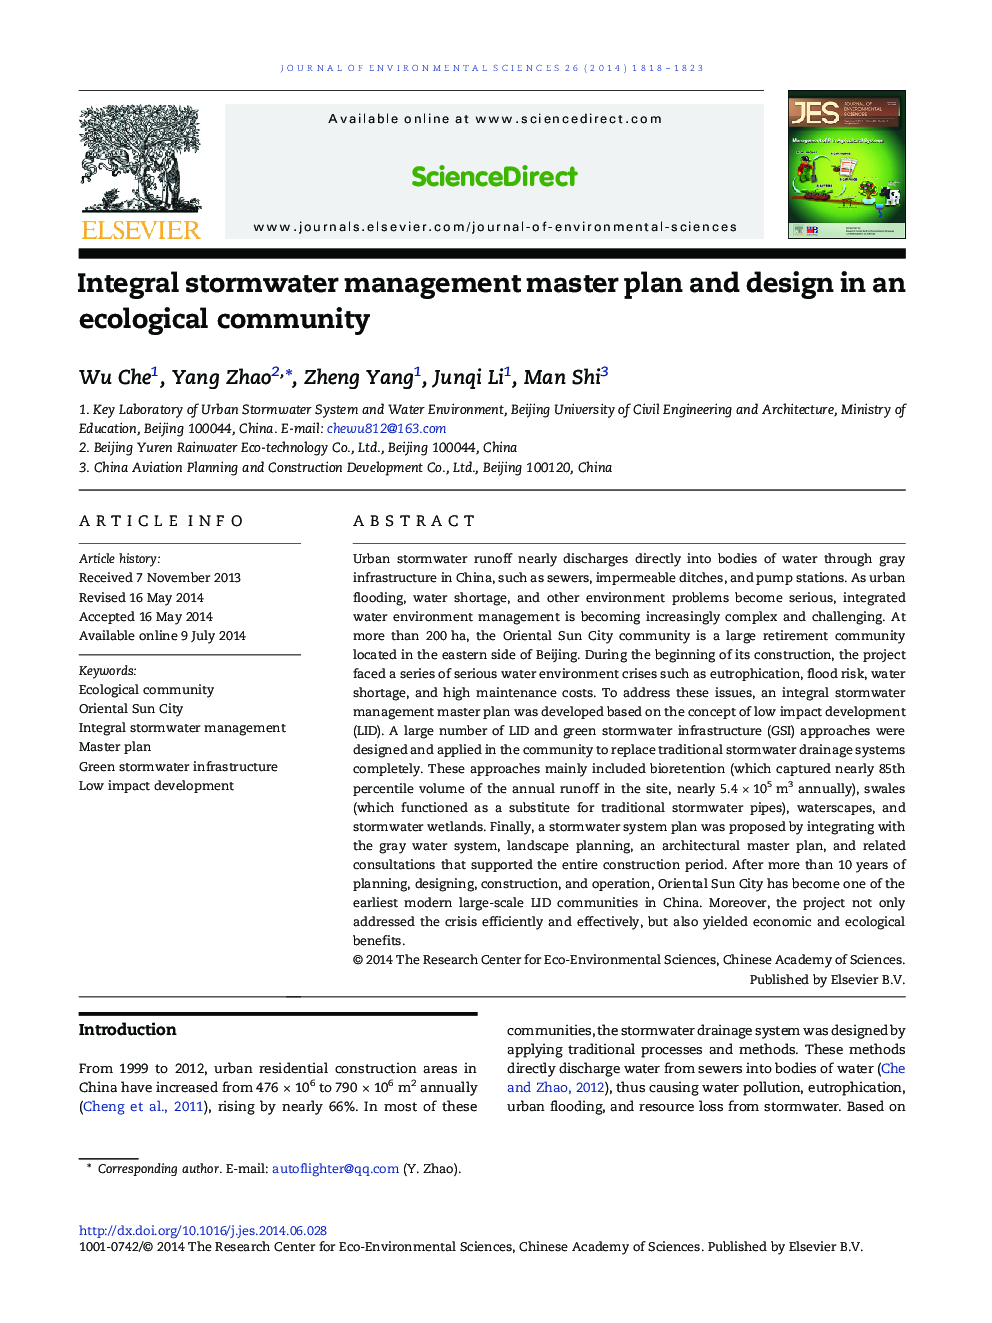 Integral stormwater management master plan and design in an ecological community